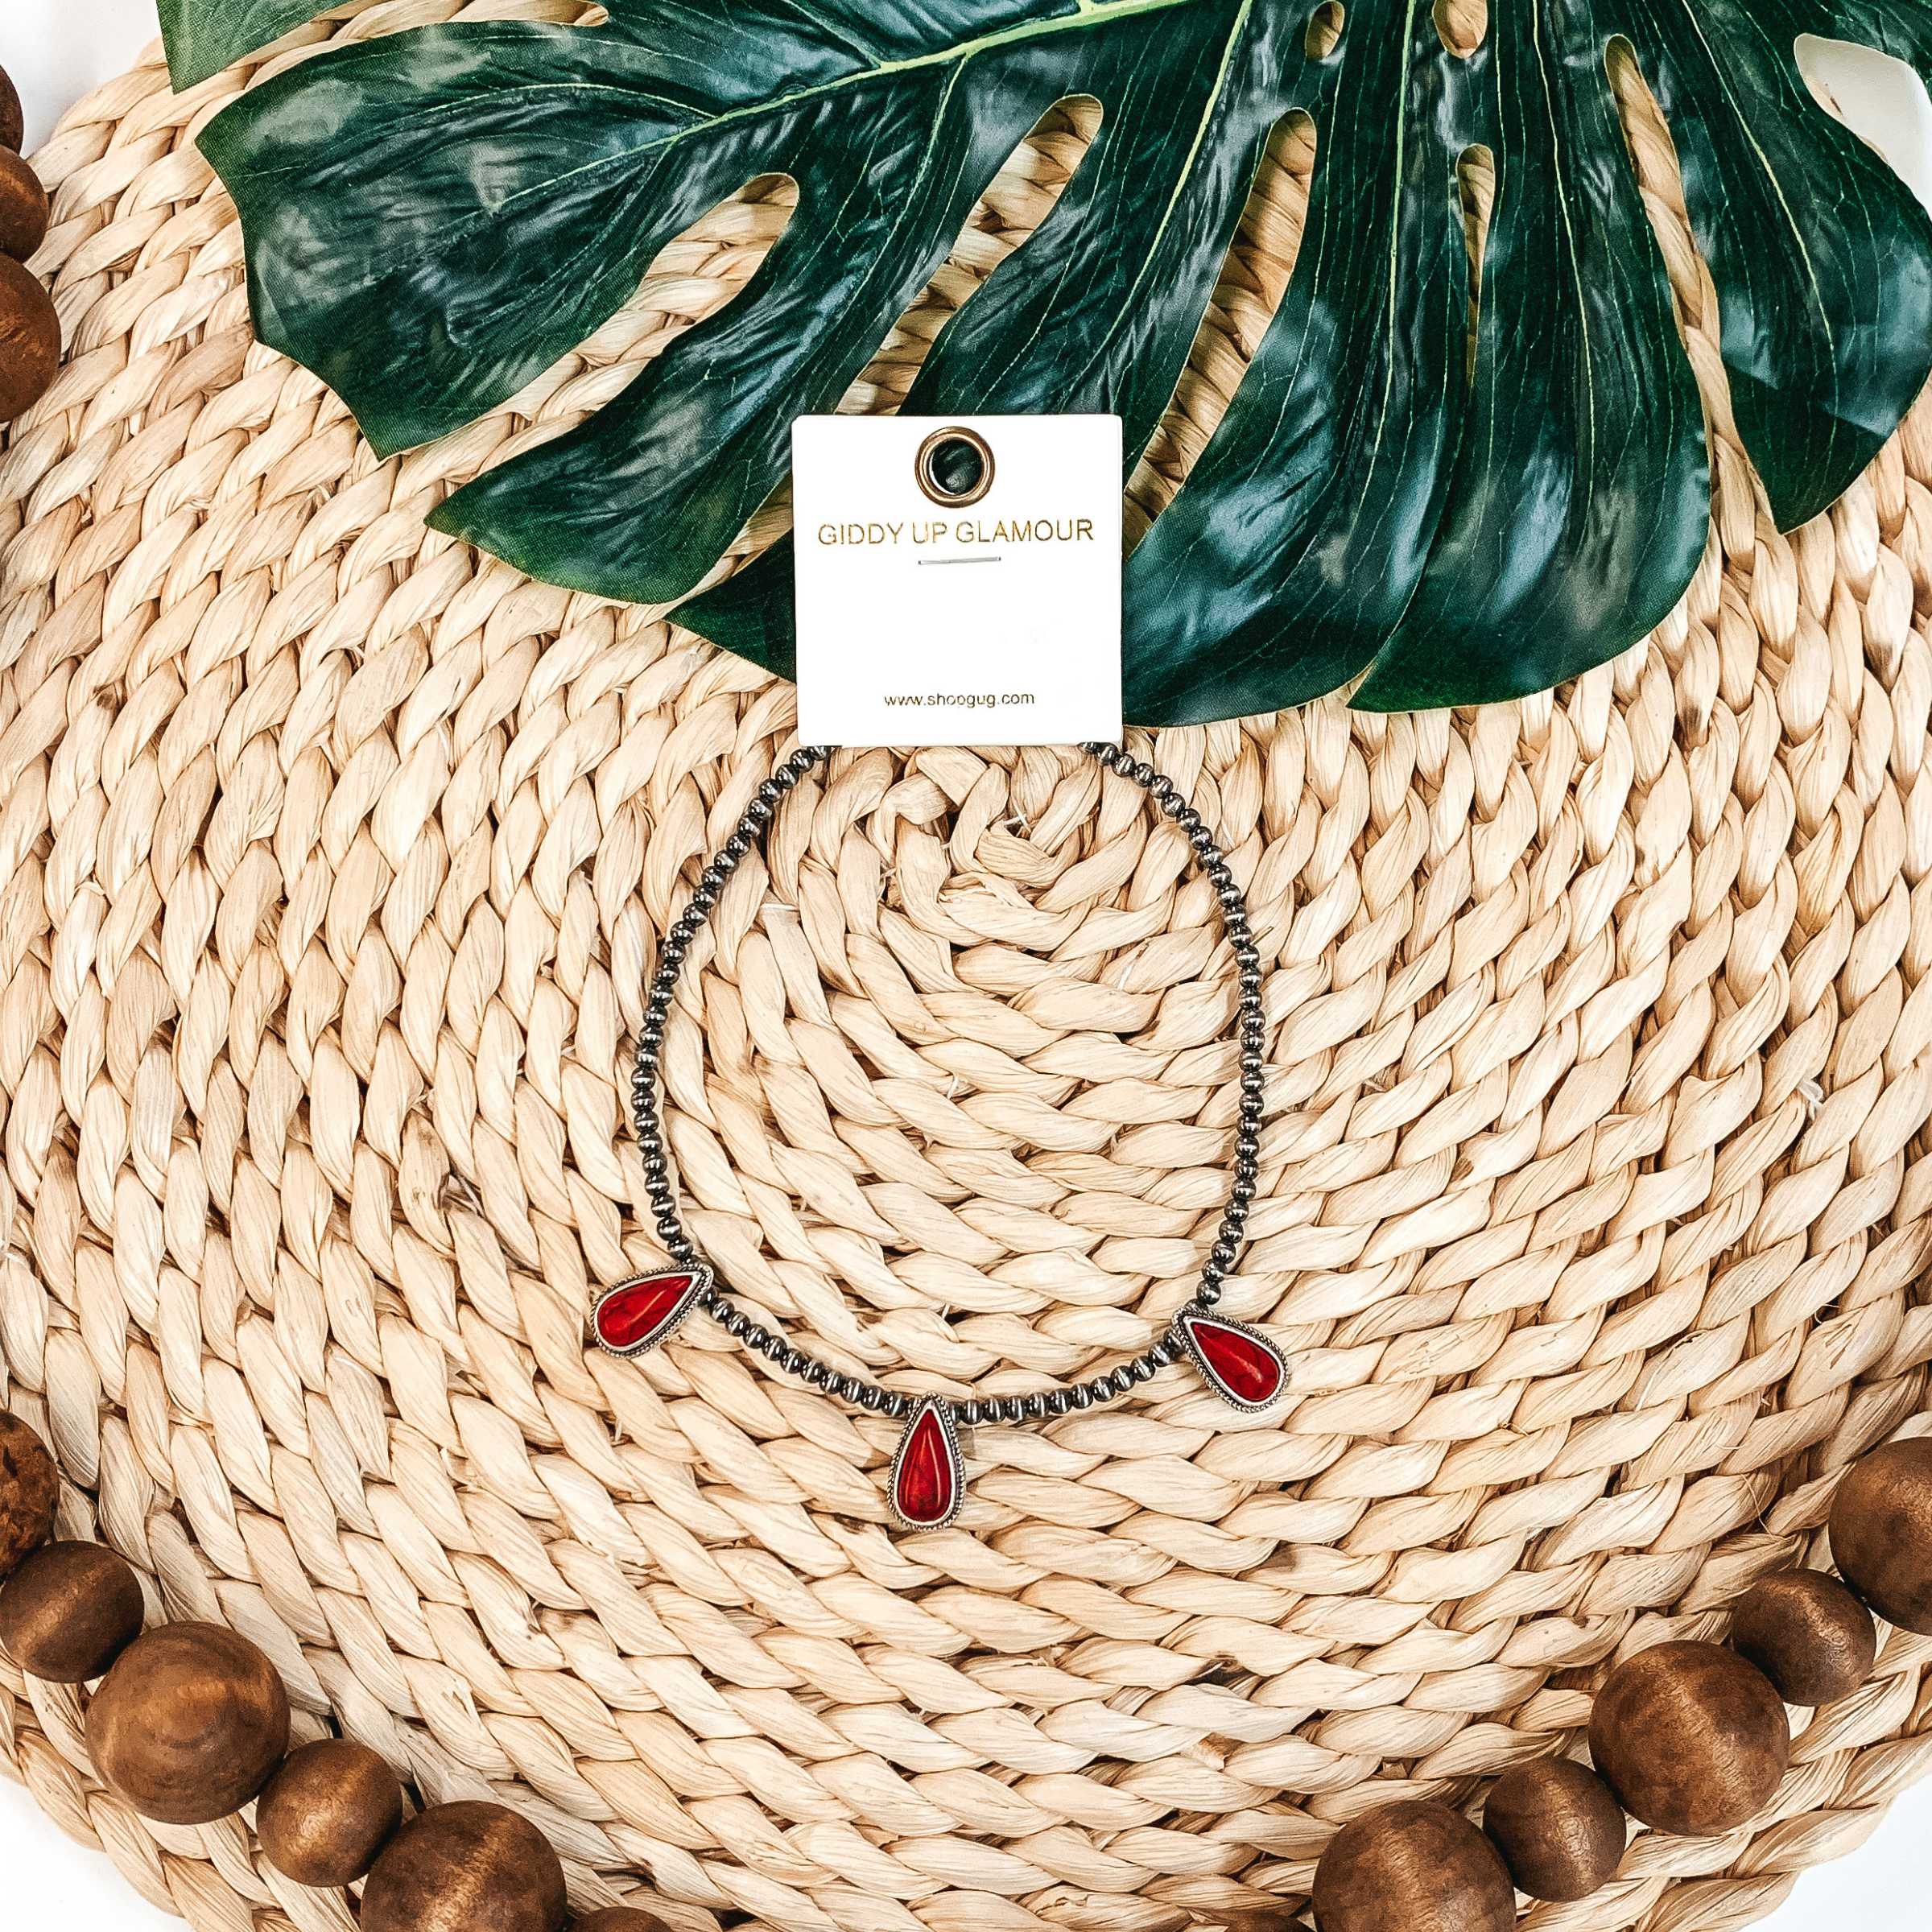 Silver beaded necklace with three red, teardrop stone charms. This necklace is pictured on a tan basket weave with a green leaf in the background.